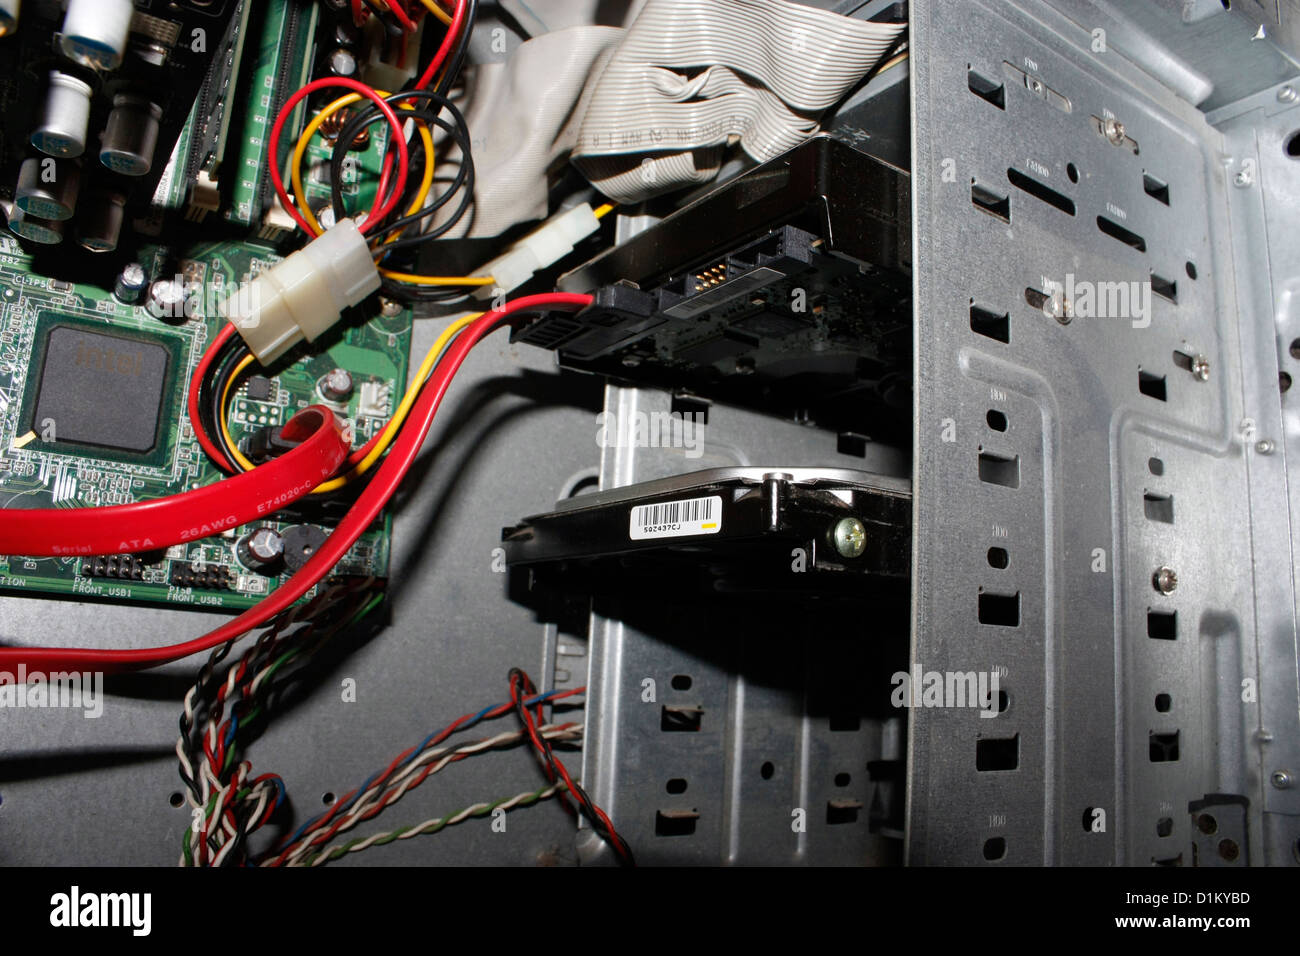 A desktop computer PC with opened cabinet showing the internal parts Stock Photo